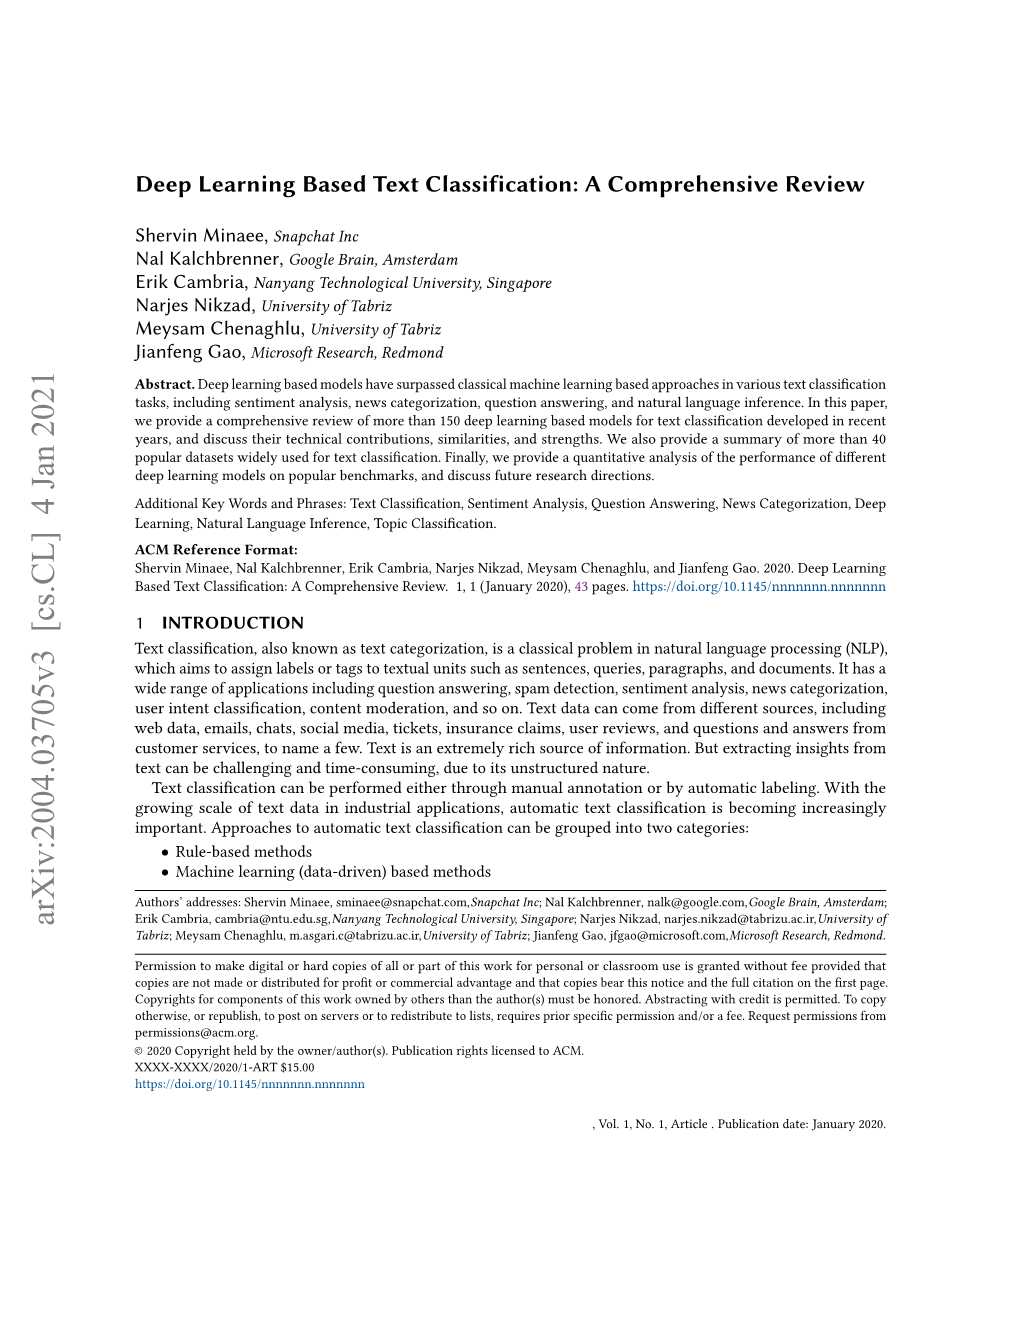 Deep Learning Based Text Classification: a Comprehensive Review